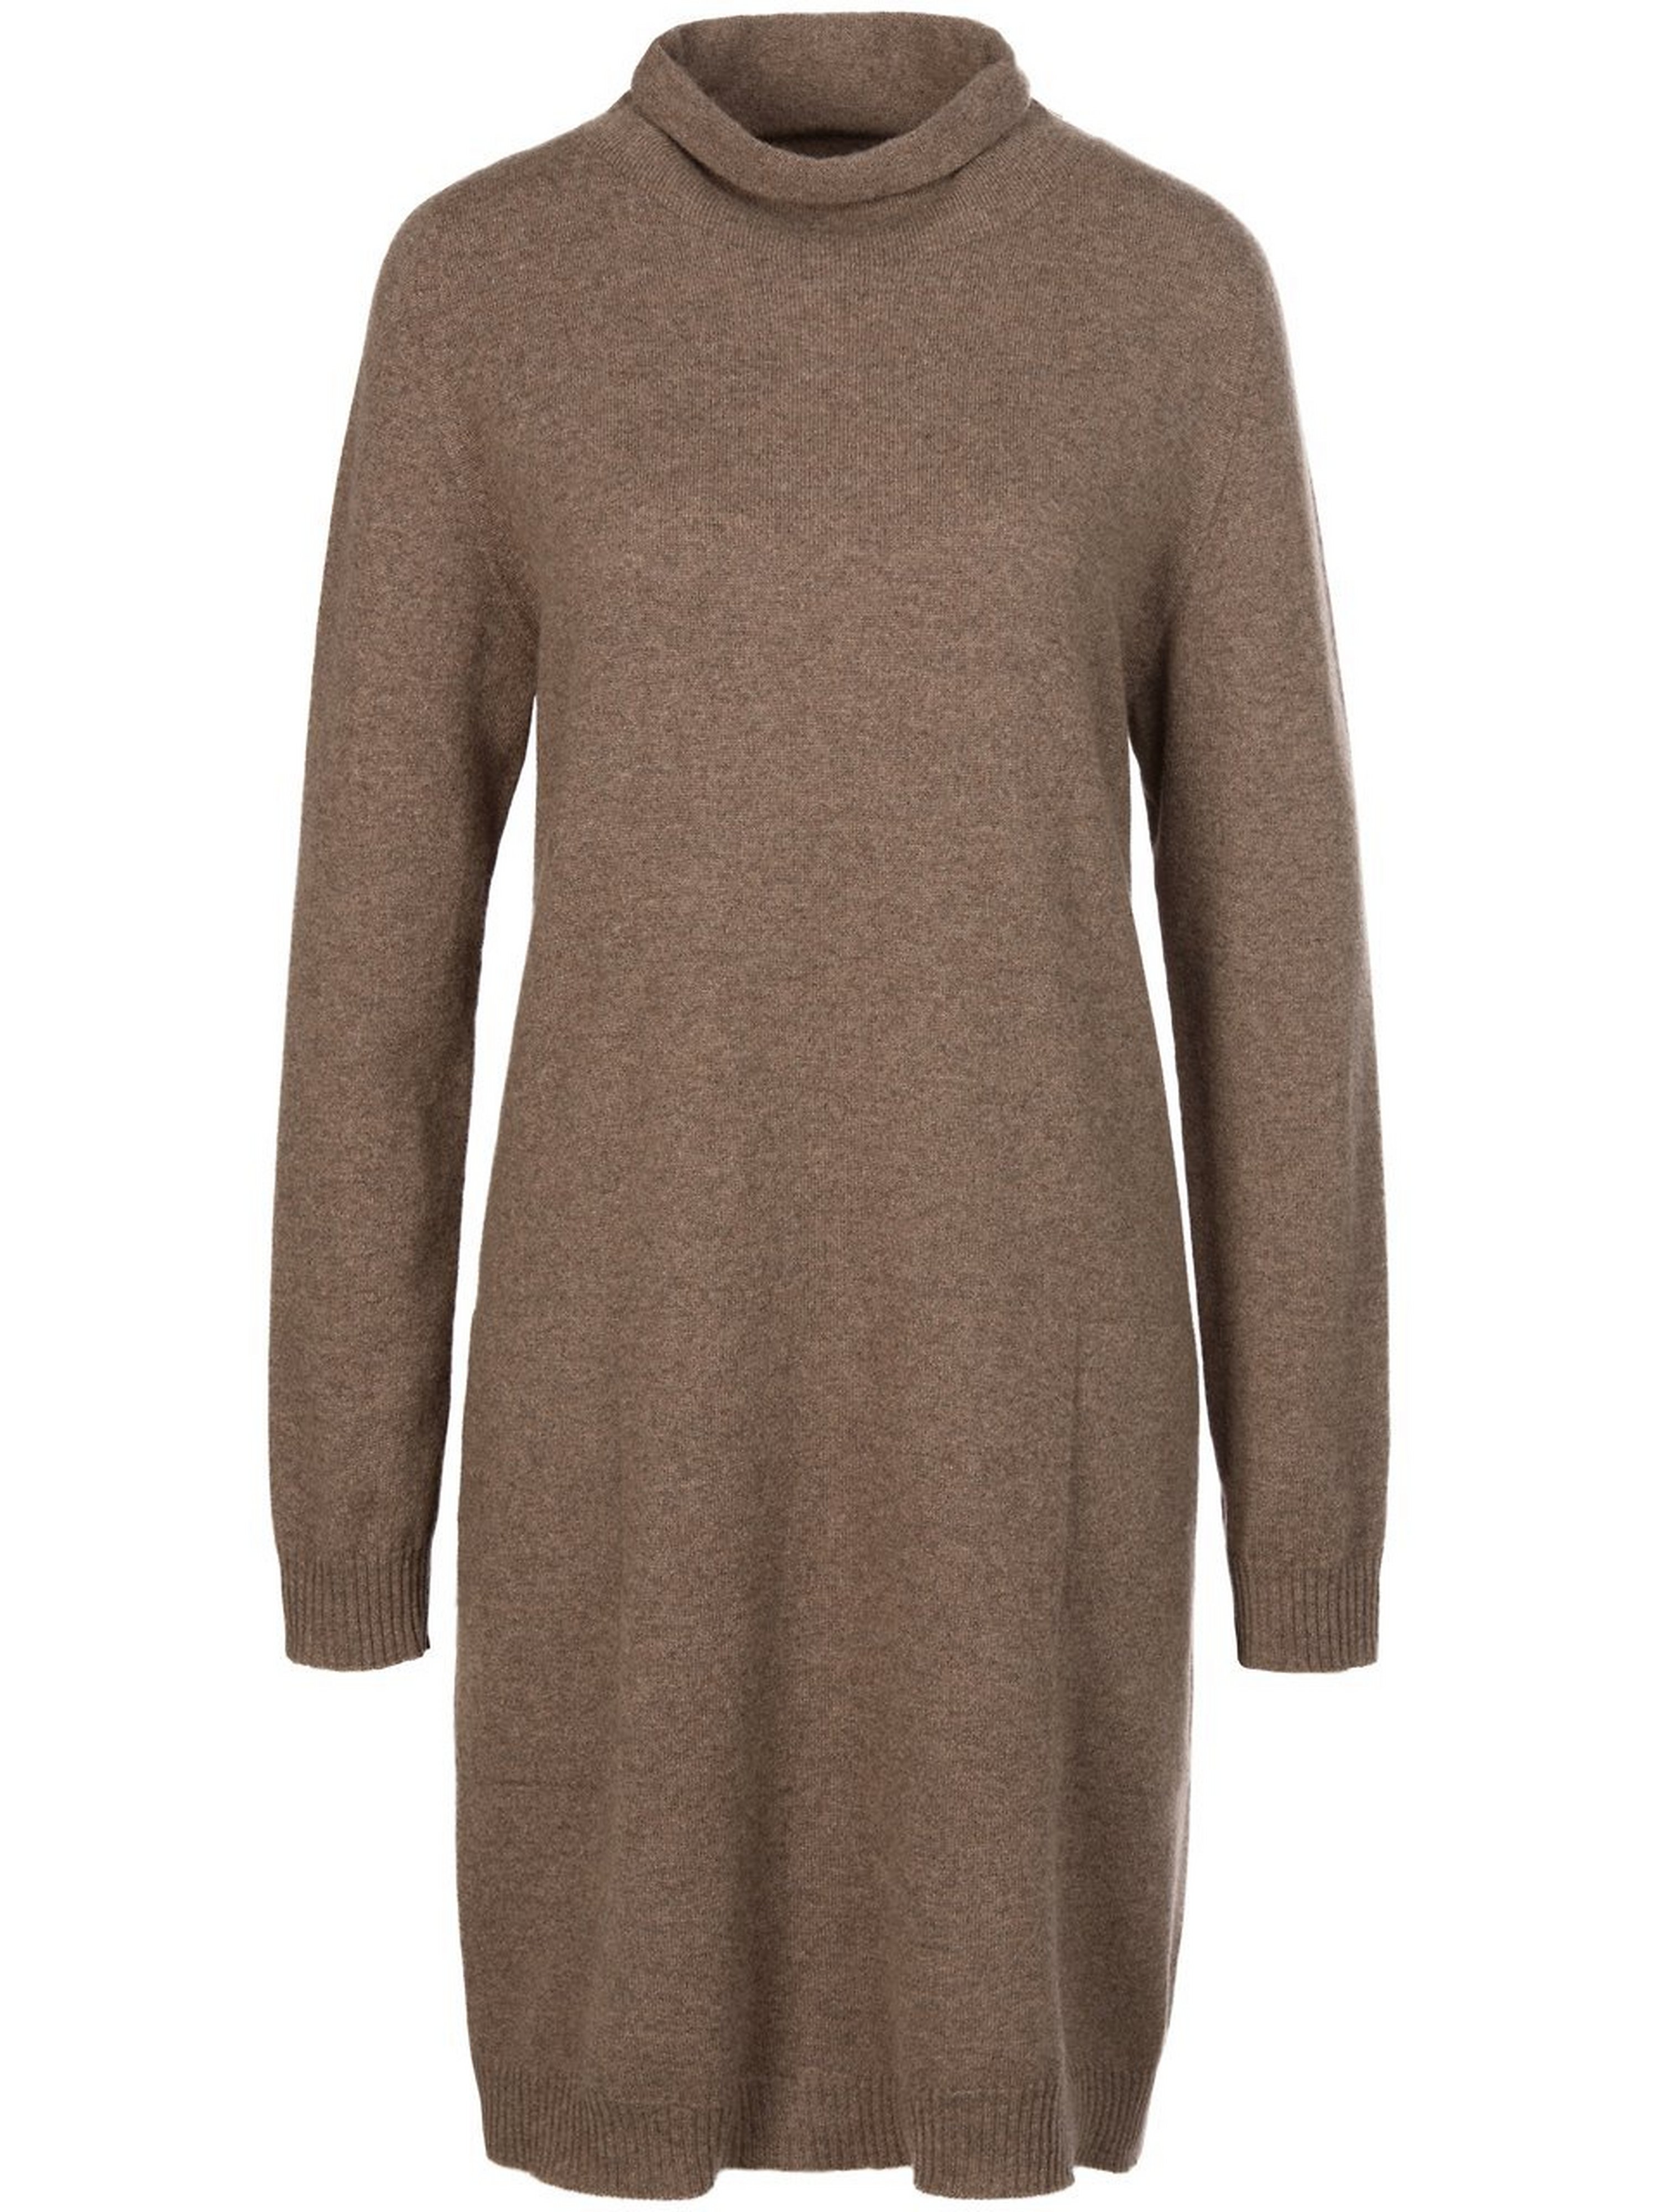 Le pull long avec manches longues  include beige taille 40